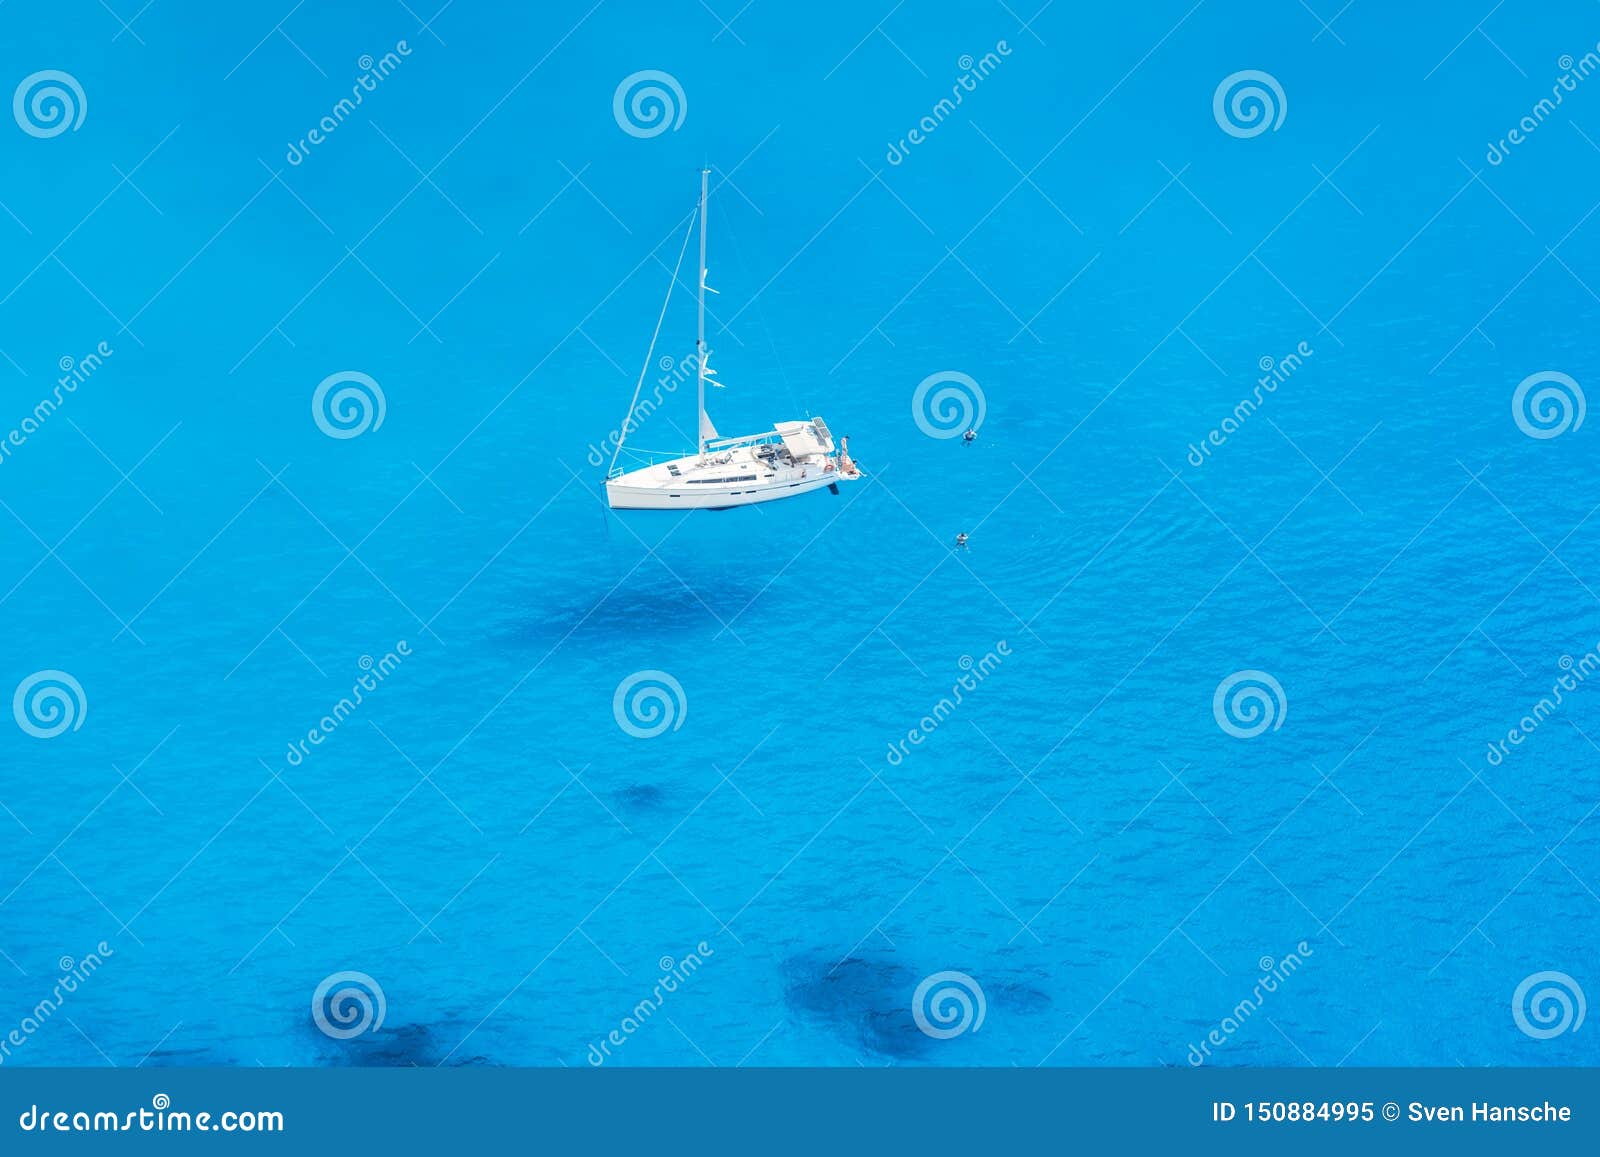 a sailing boat over the blue sea of the ionian islands in greece, zakynthos